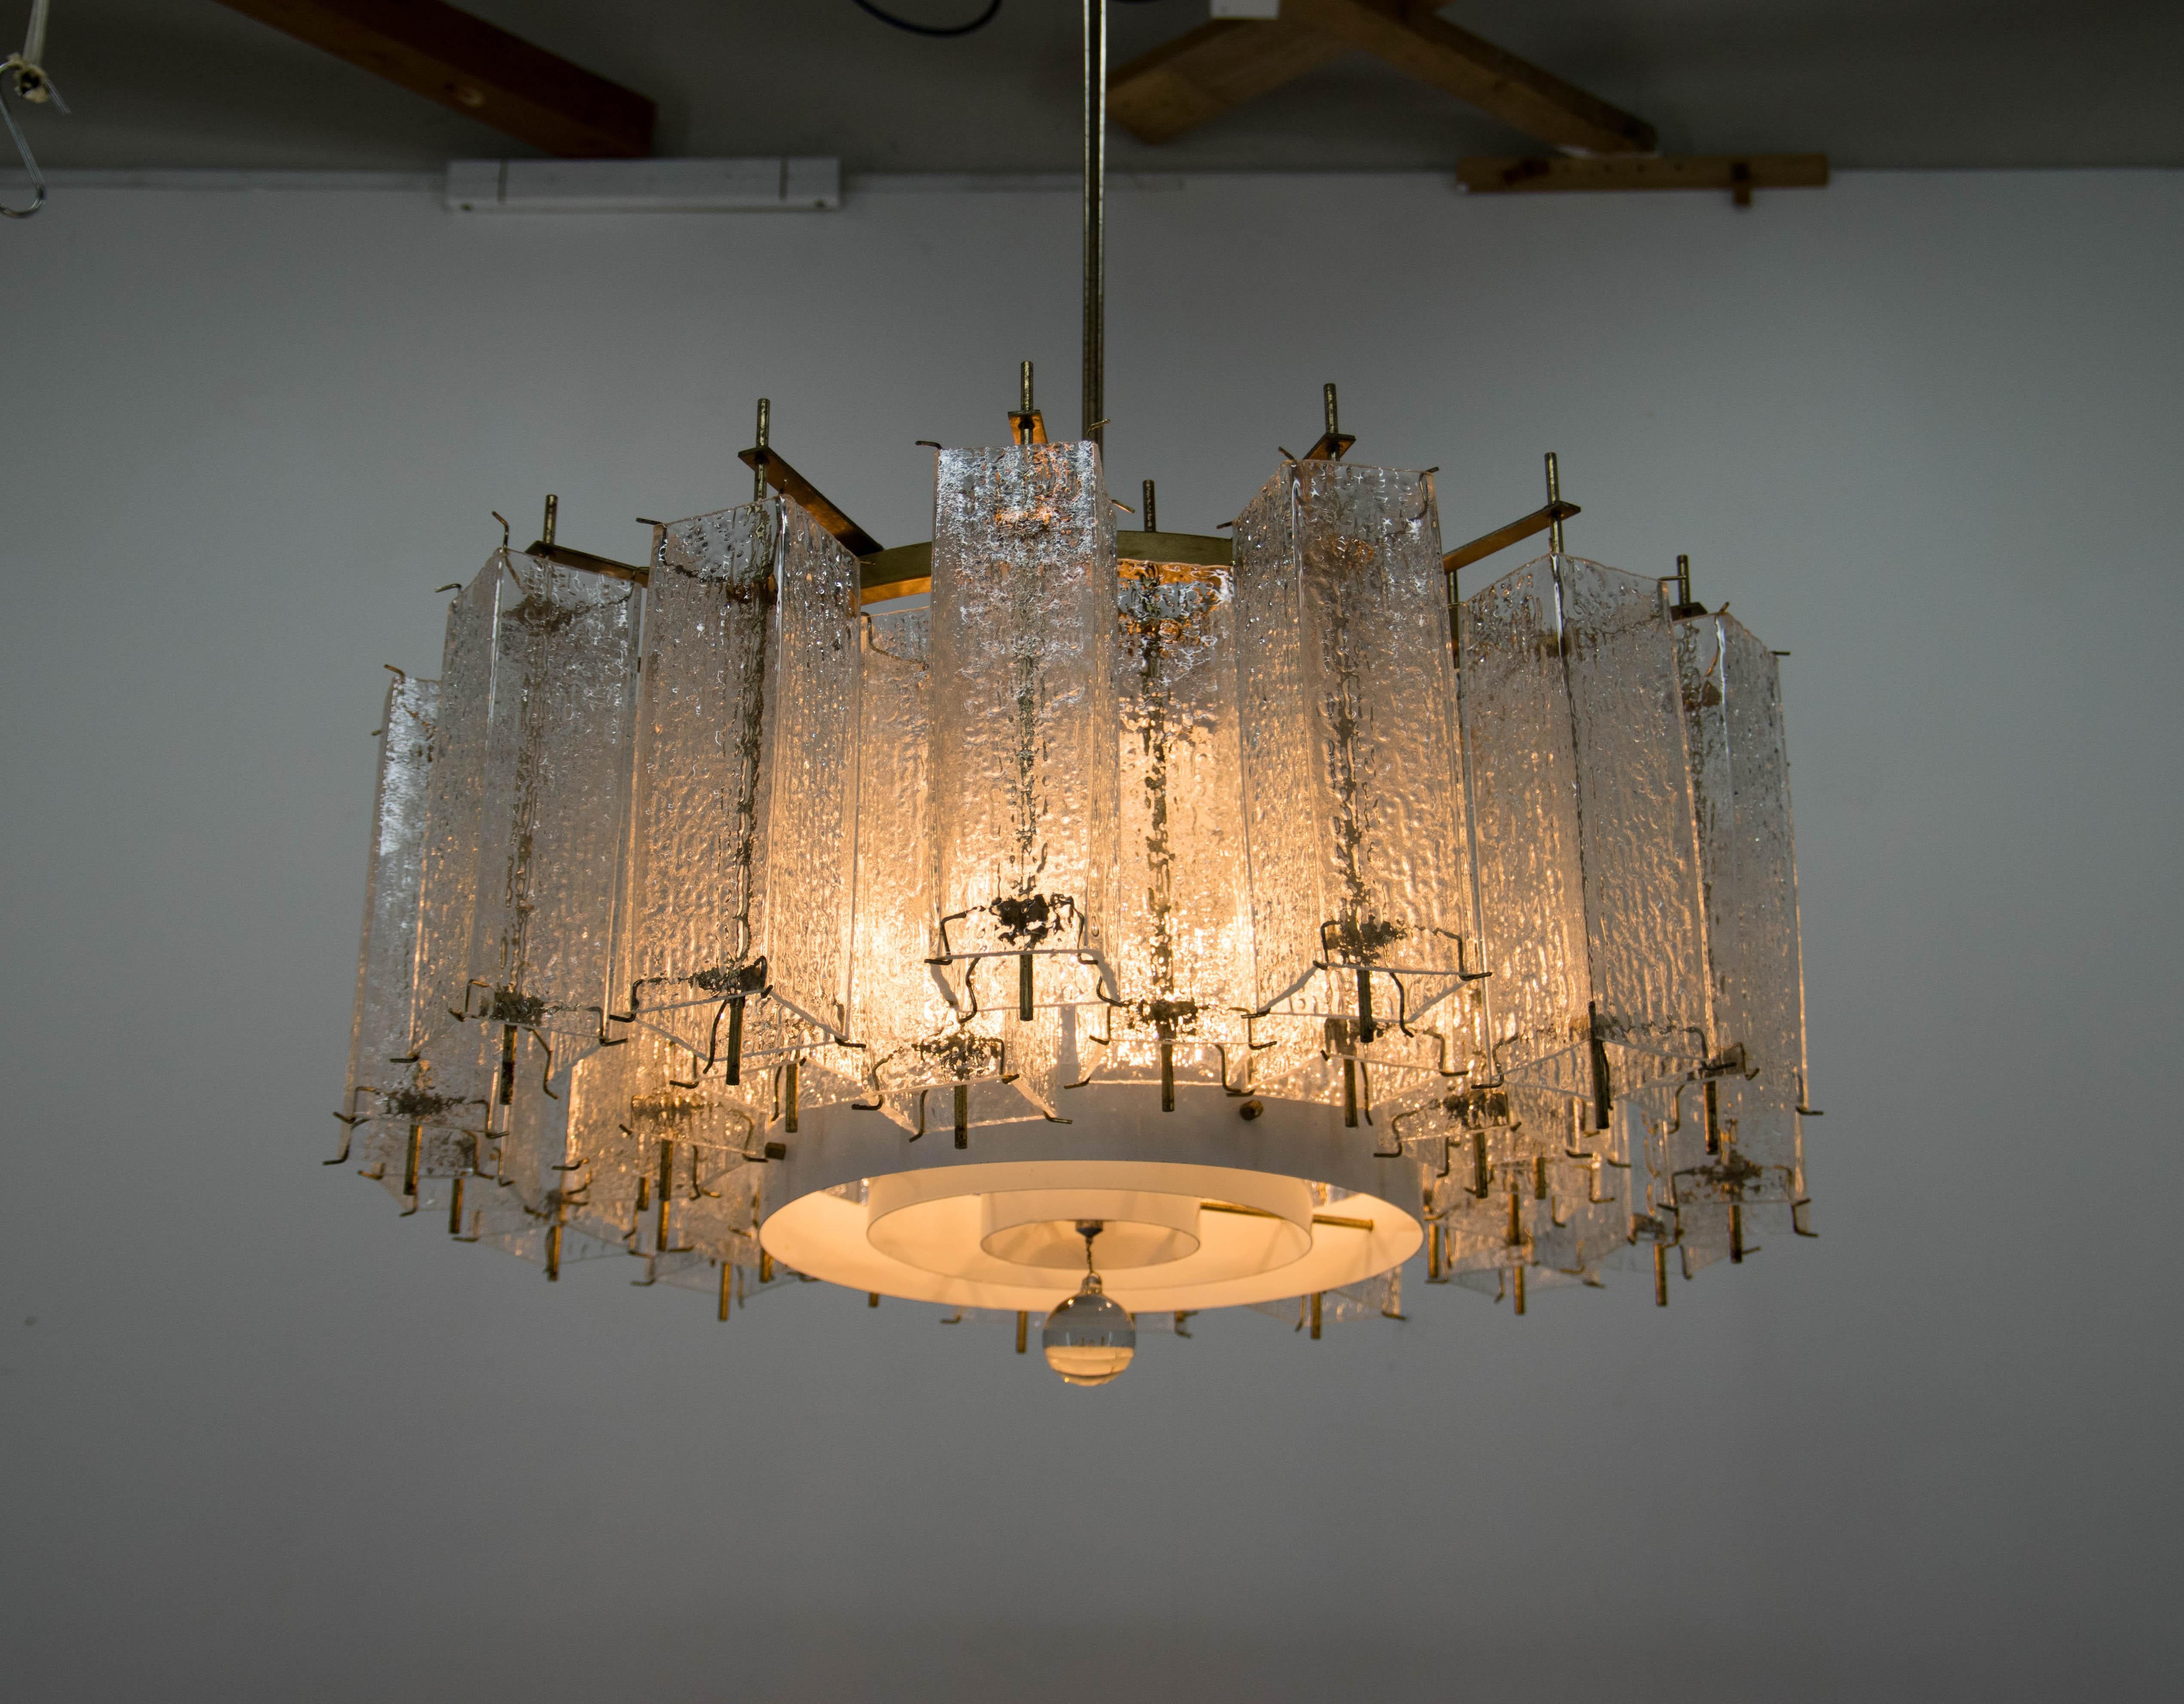 Large and heavy brutalist chandelier by Kamenicky Senov.
Two pieces available.
Cleaned, rewired: two separate circuits - 3+3 x 60 W, E25-E27 bulbs
glass in perfect condition
brass with age patina
US wiring compatible.
Shipping quote on request.